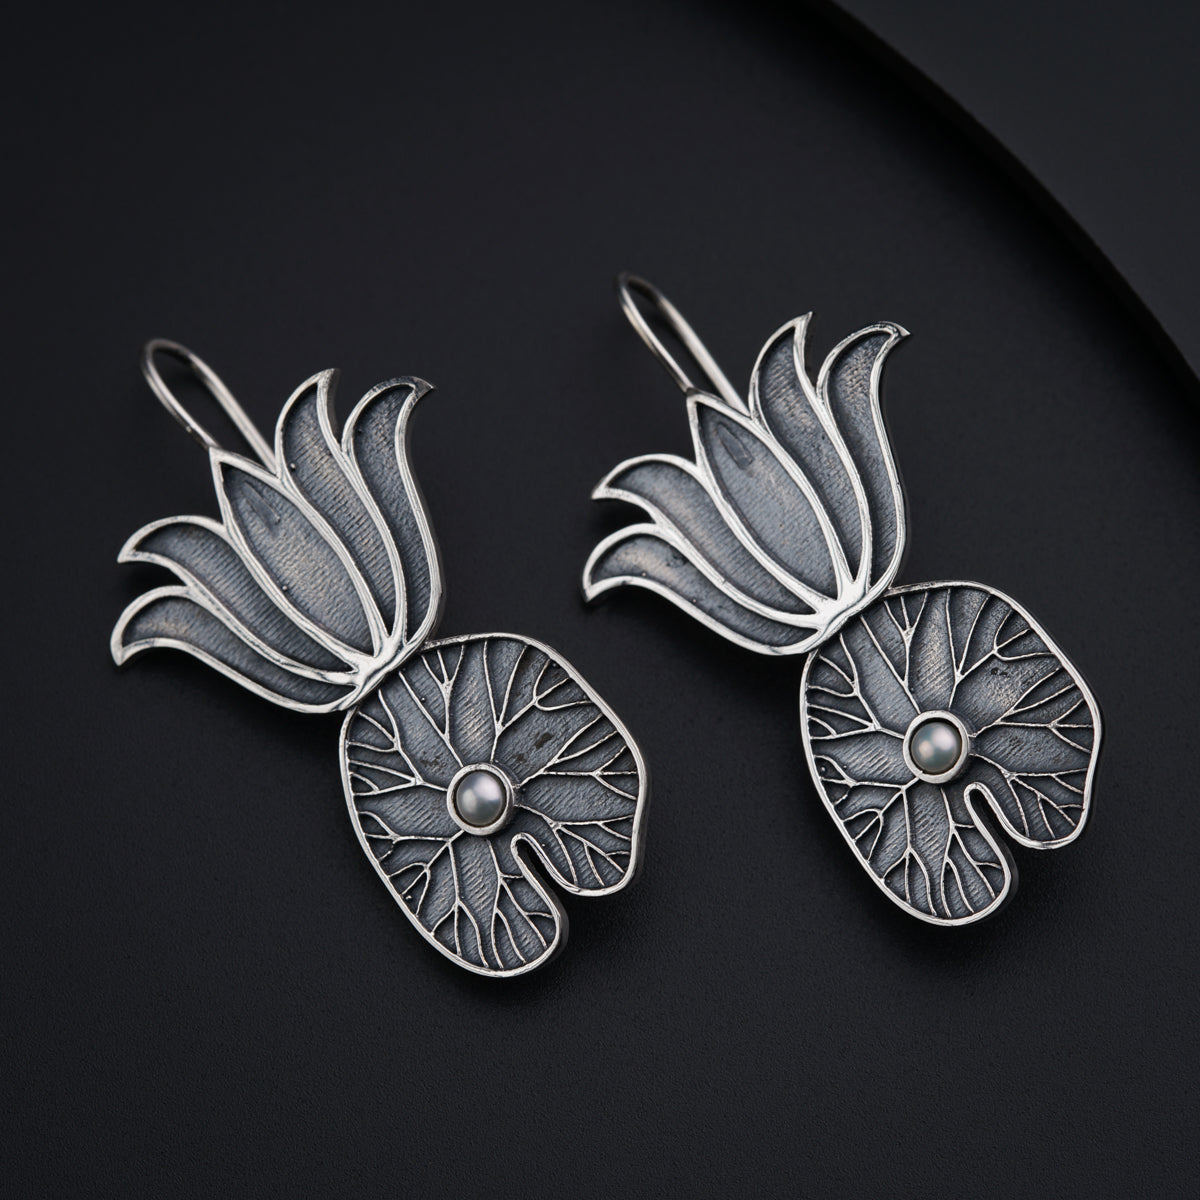 a close up of two silver brooches on a black surface